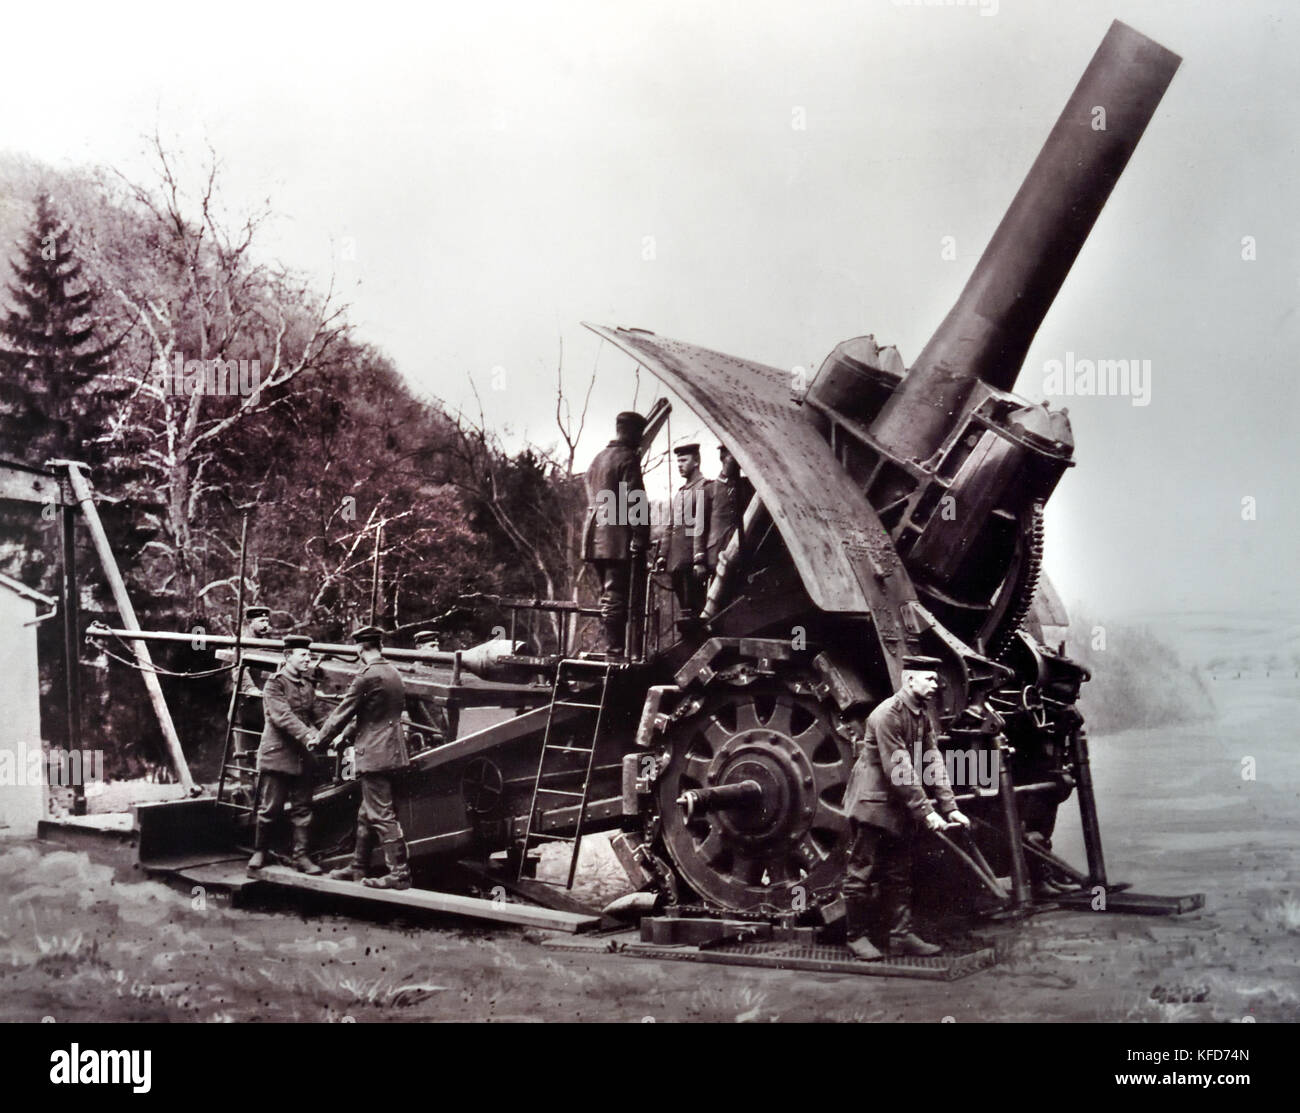 One of the first Big Berthas being readied for firing - World War I - First World War, The Great War, 28 July 1914 to 11 November 1918. ( Big Bertha (howitzer) super-heavy siege artillery developed by the armaments manufacturer Krupp in Germany on the eve of World War I. Its barrel diameter caliber was 420 mm -16.5 inch ) Stock Photo